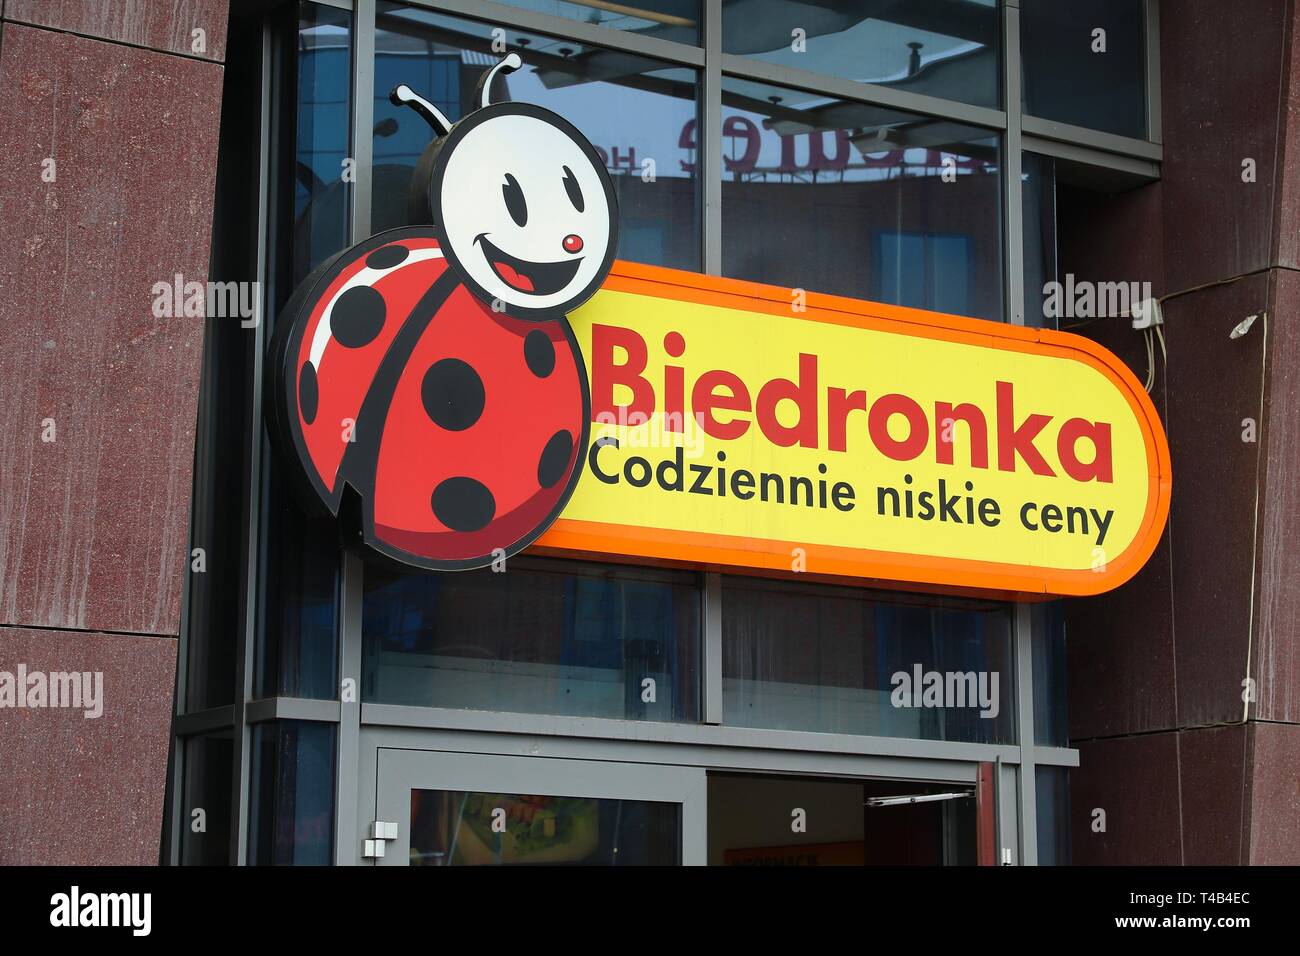 WROCLAW, POLAND - MAY 11, 2018: Biedronka supermarket sign in Wroclaw,  Poland. Biedronka is one of largest retail chains in Poland, with more than  2,7 Stock Photo - Alamy